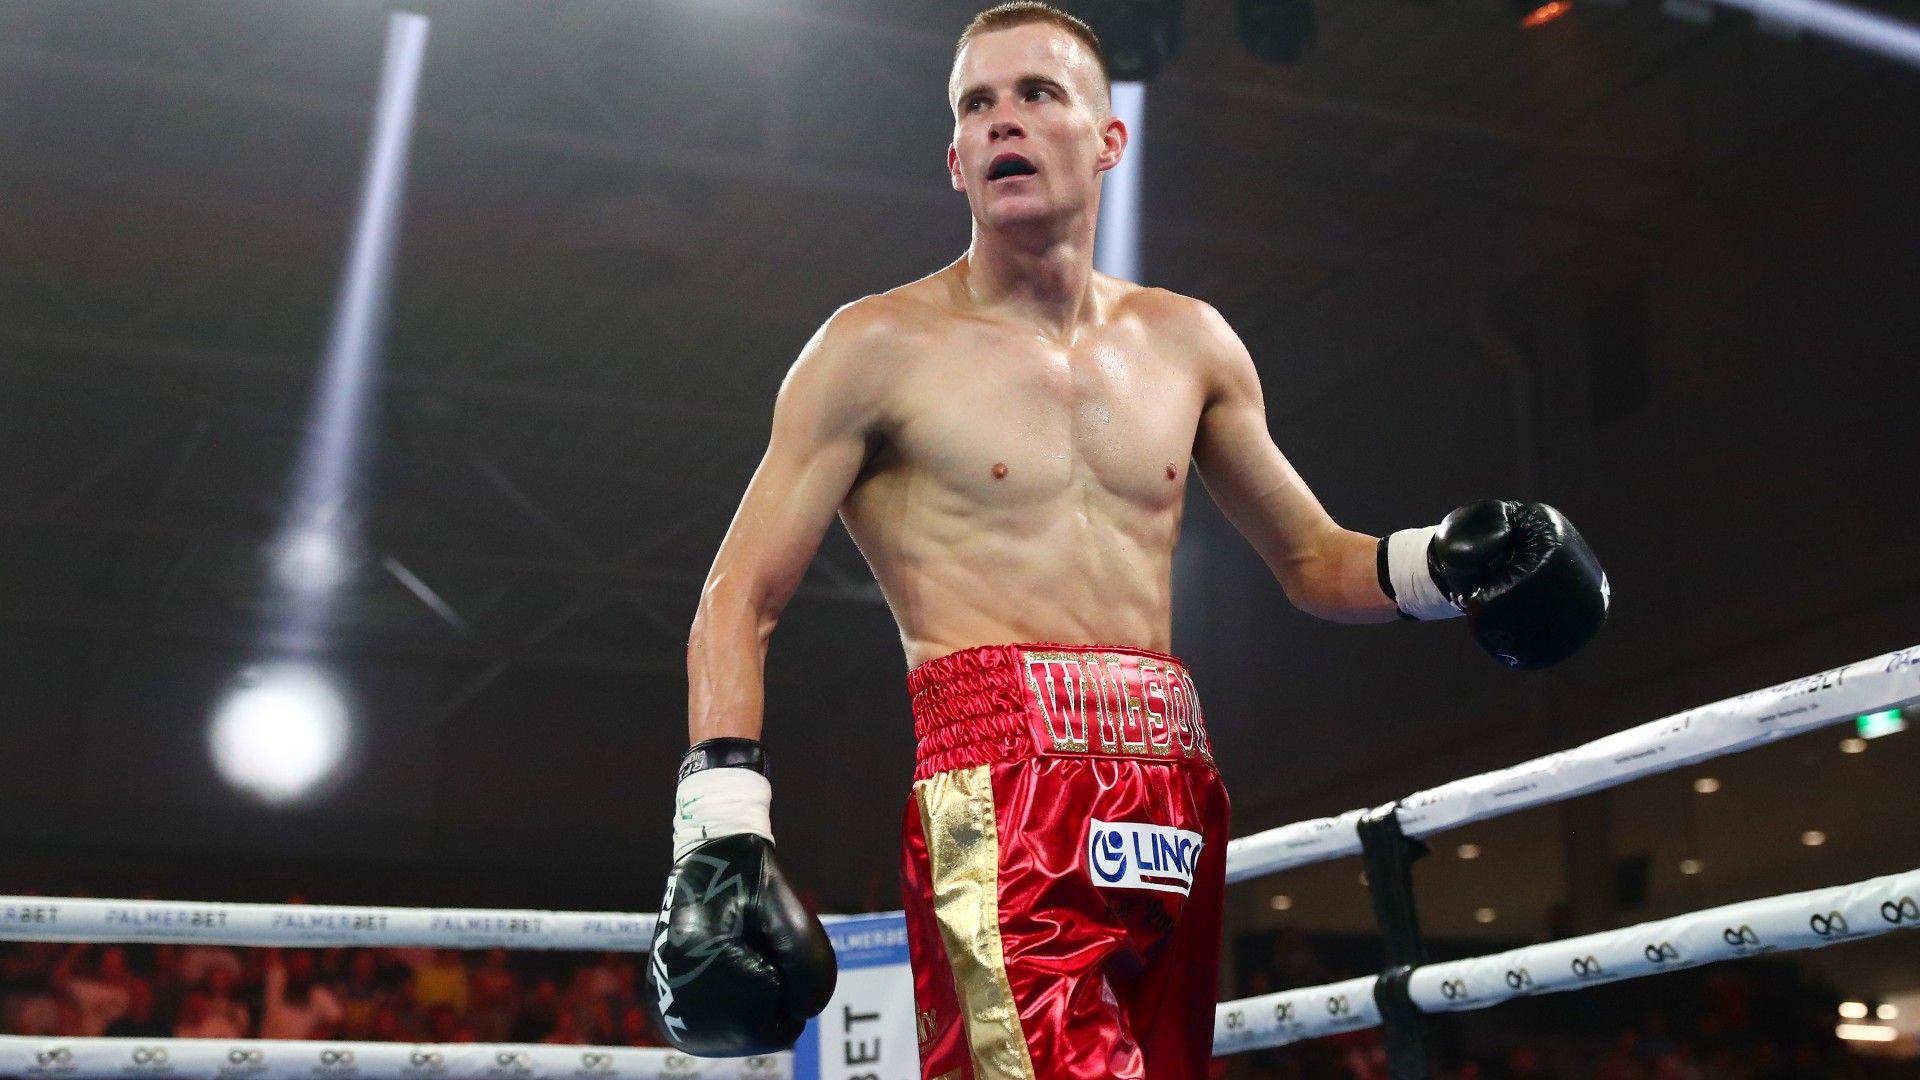 EXCLUSIVE: How Liam Wilson's risk-taking attitude has paid off in meteoric boxing rise